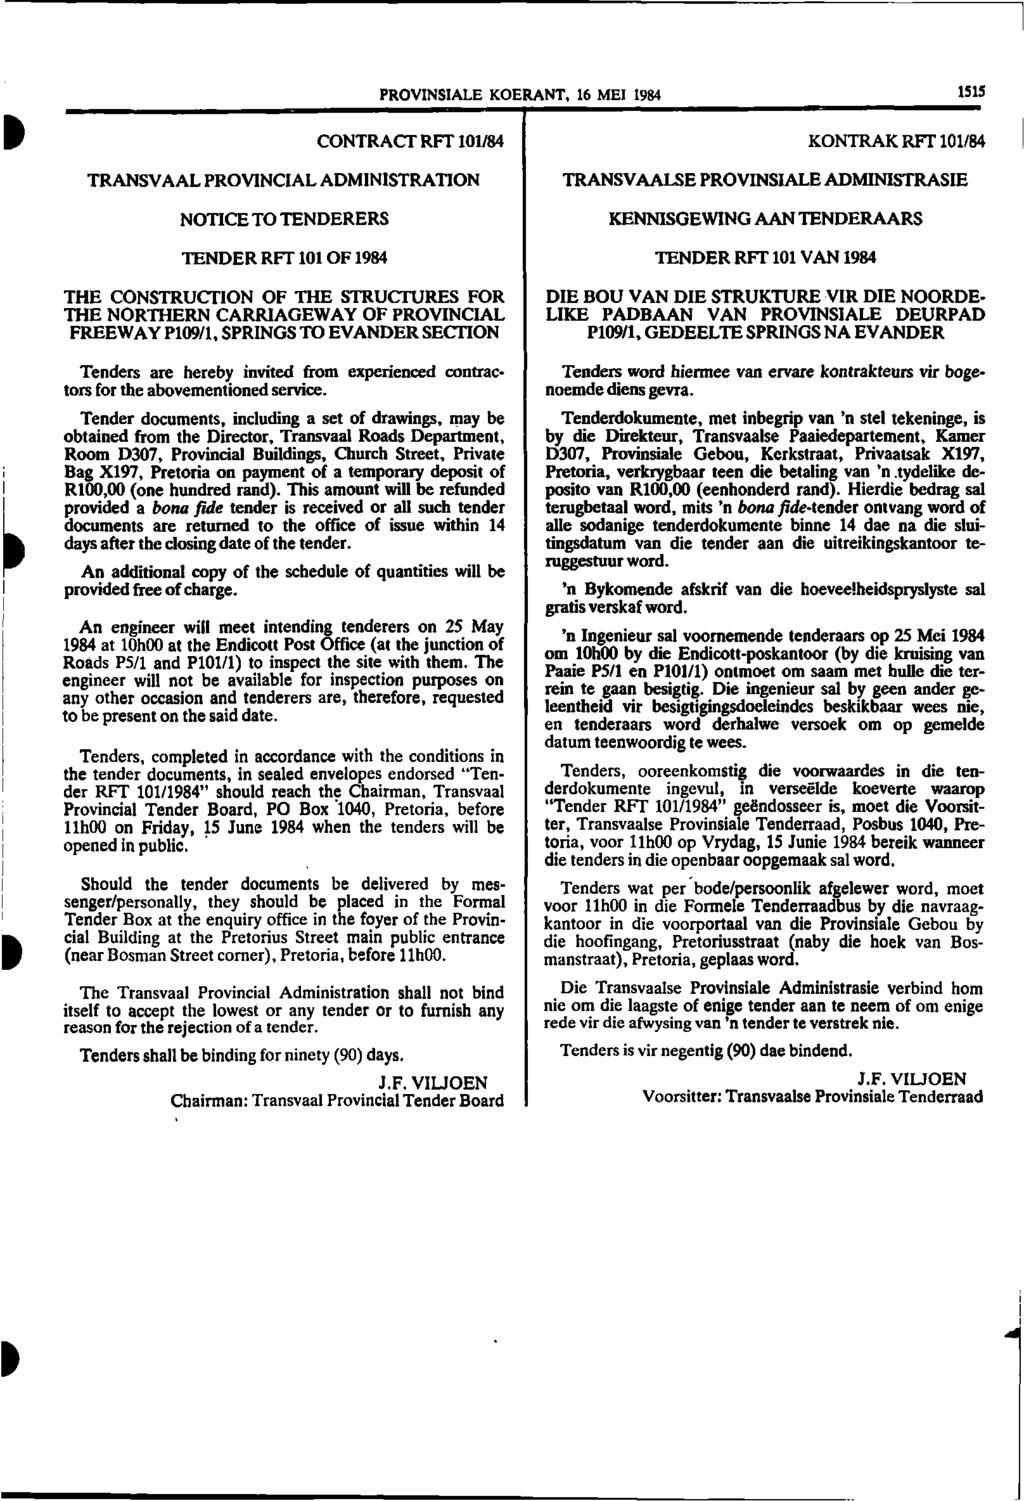 PROVINSIALE KOERANT, 16 MEI 1984 1515 CONTRACT RFT101/84 TRANSVAAL PROVINCIAL ADMINISTRATION NOTICE TO TENDERERS TENDER RFT 101 OF 1984 THE CONSTRUCTION OF THE STRUCTURES FOR THE NORTHERN CARRIAGEWAY